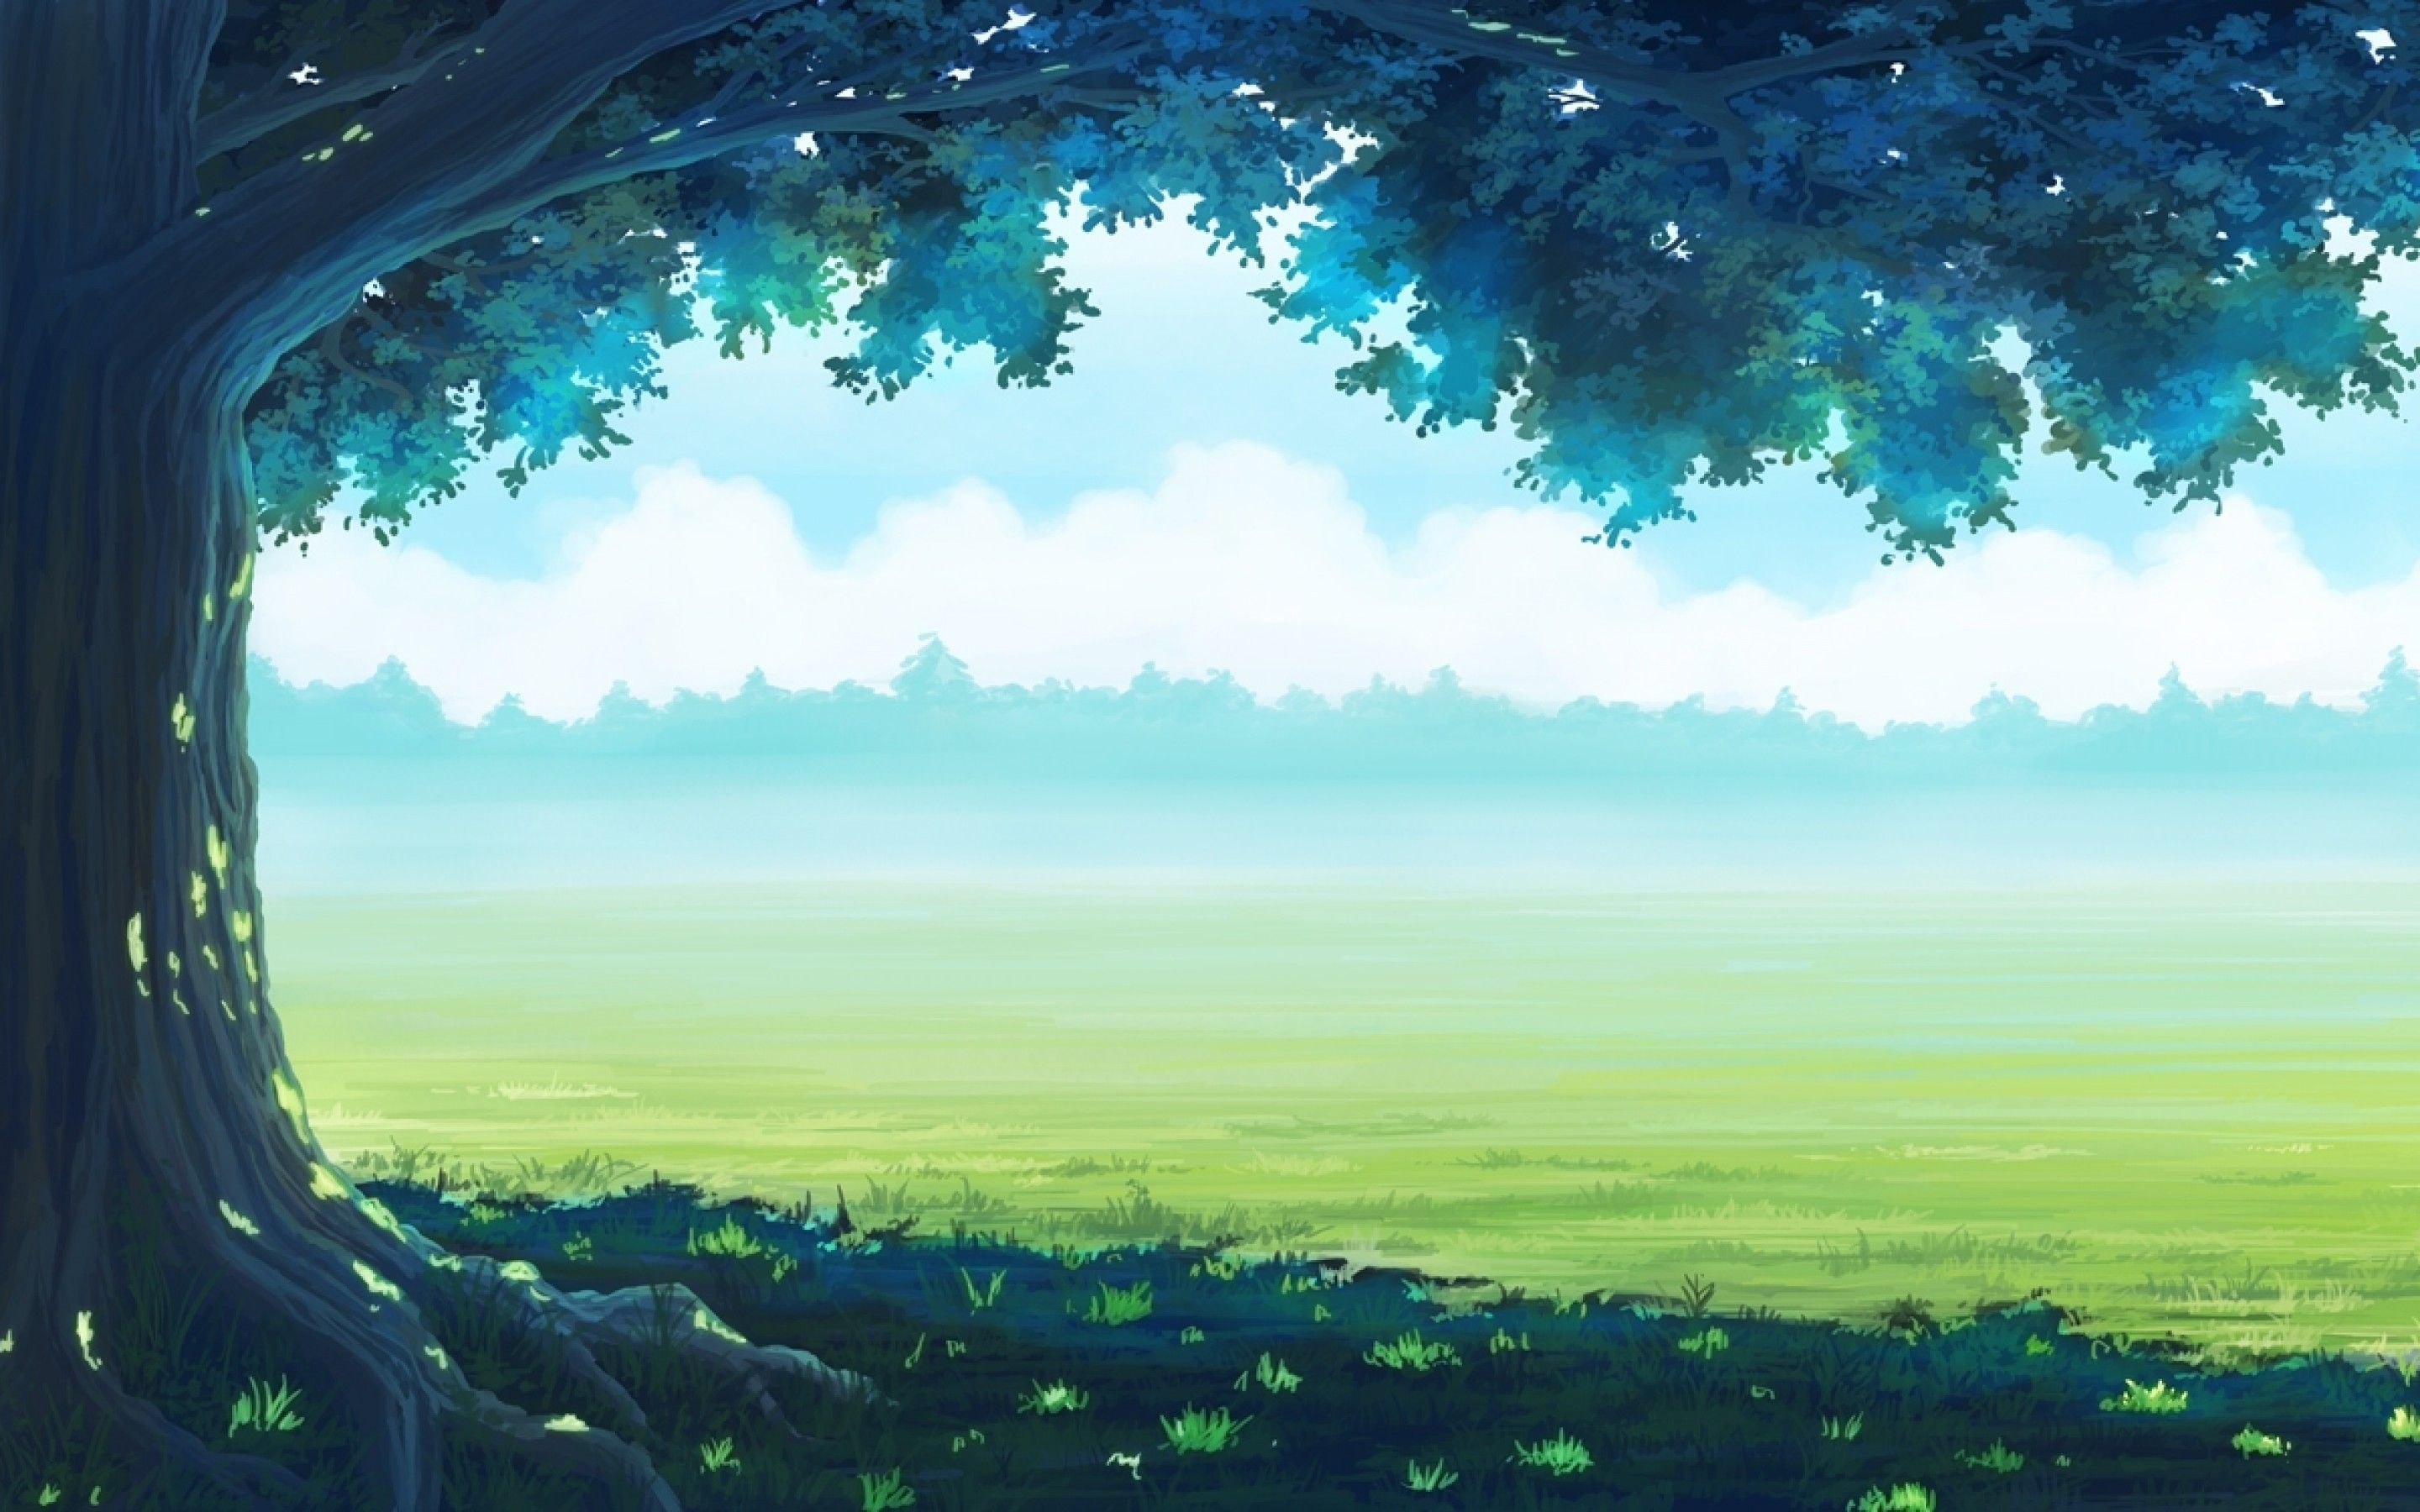 Download 2880x1800 Anime Landscaope, Forest, Grass Wallpaper for MacBook Pro 15 inch